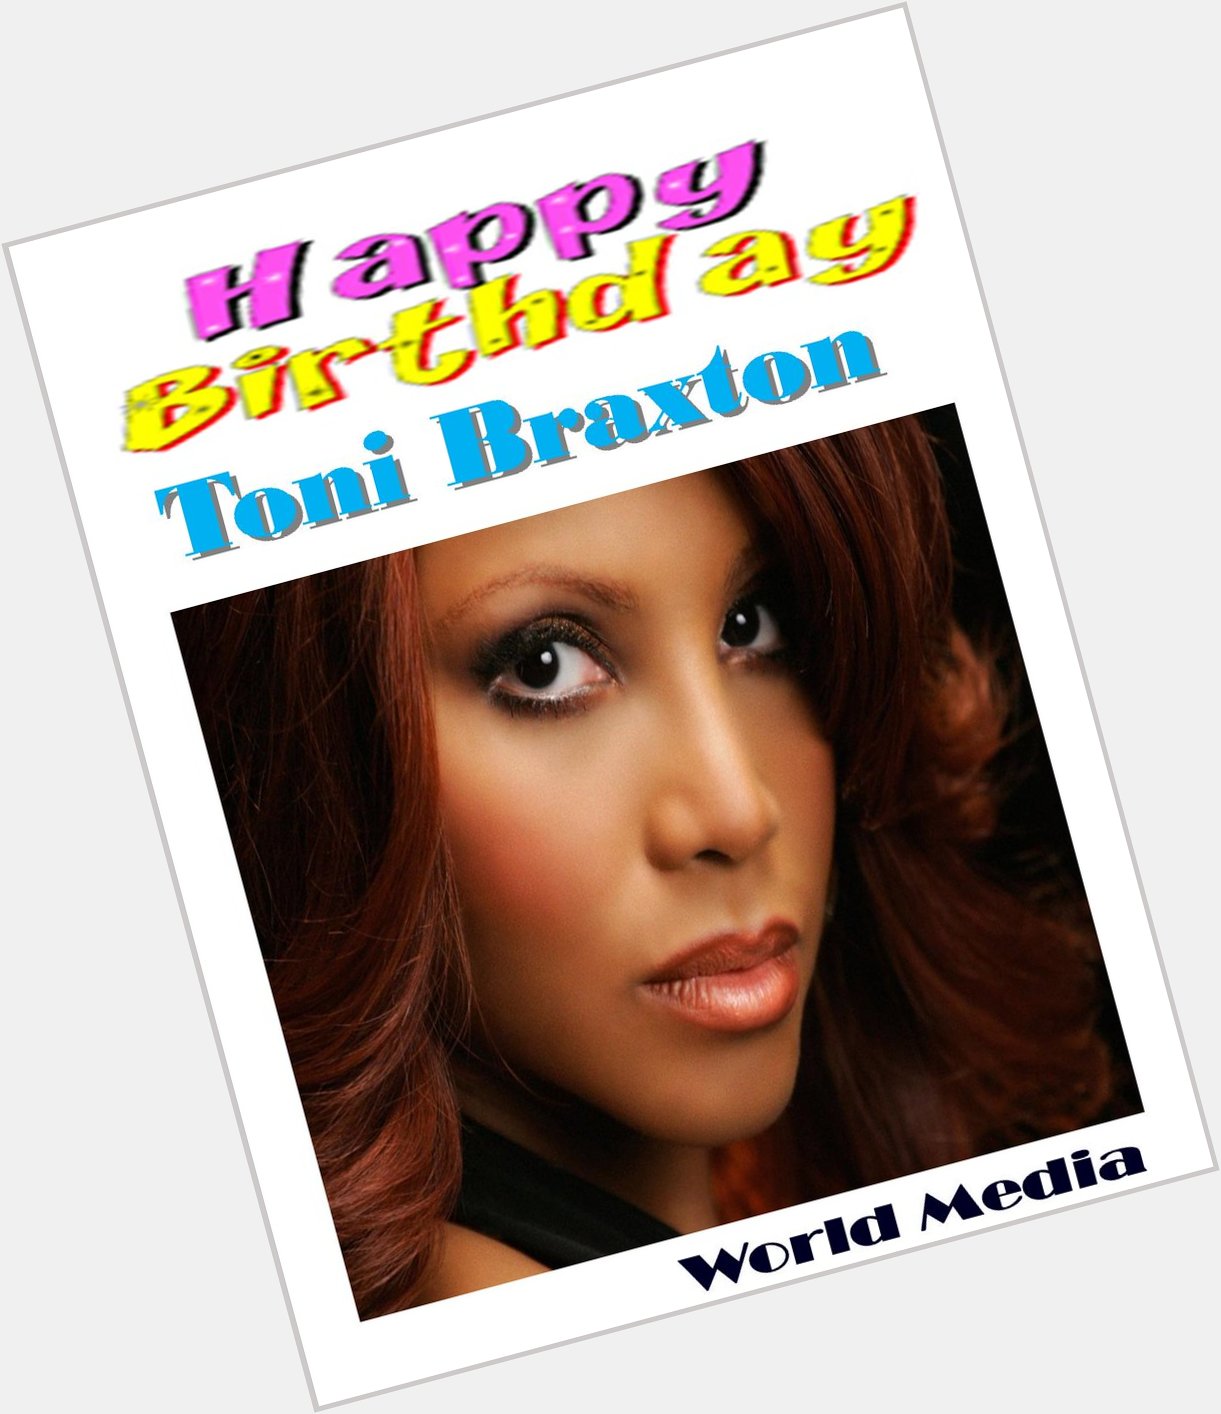 LETS ALL WITH MUSICAL DIVA
TONI BRAXTON A VERY HAPPY BIRTHDAY 